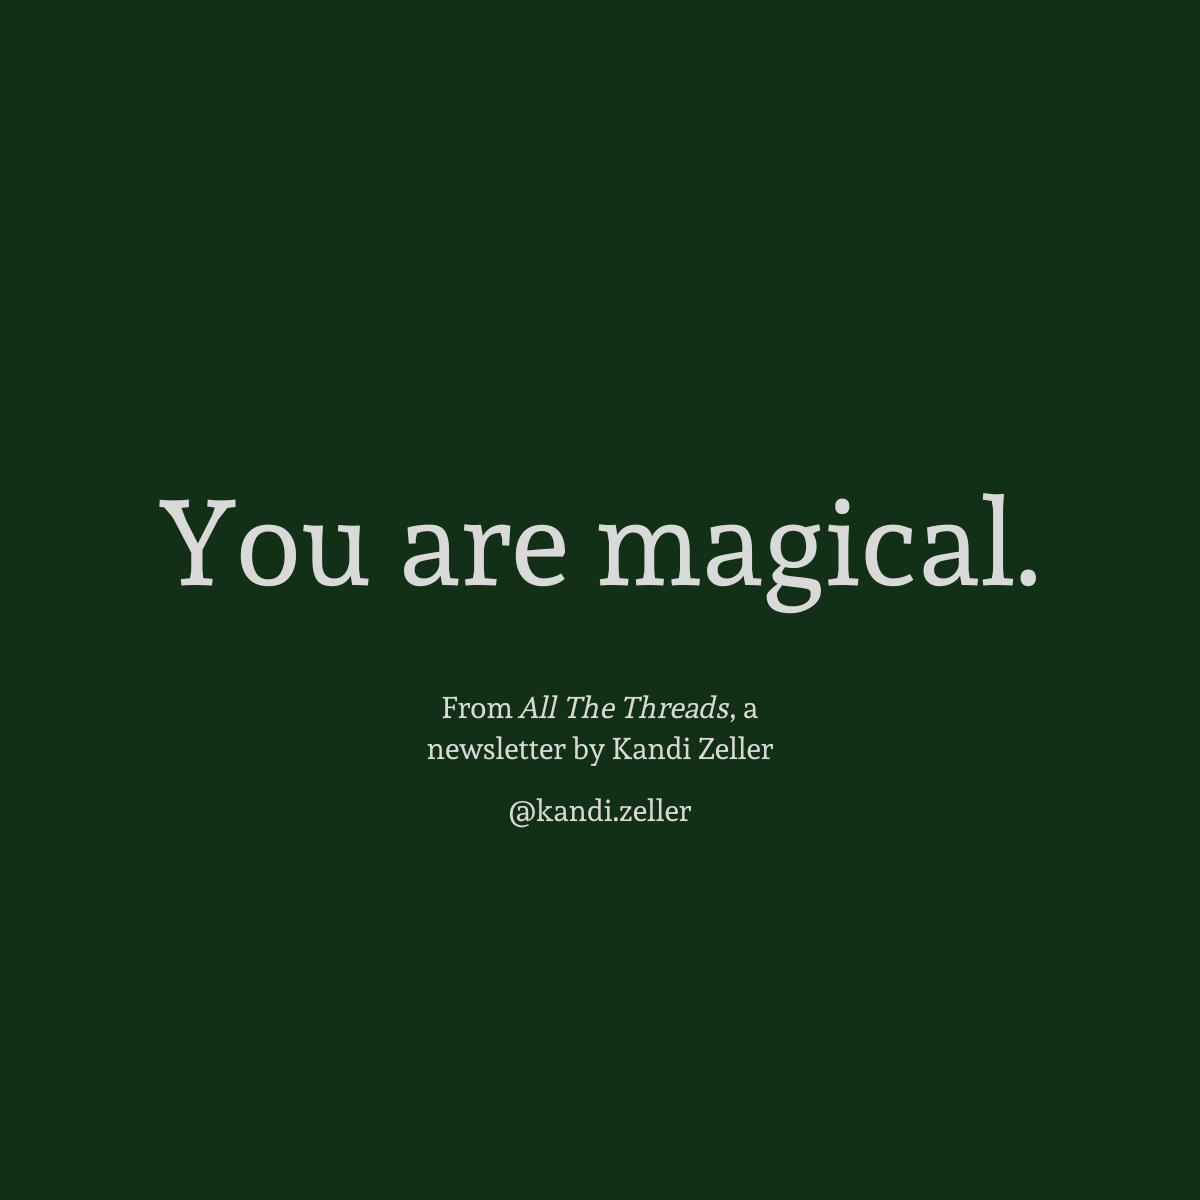 A dark green background with white lettering that reads, “You are magical.” This is followed by the words, “From All The Threads, a newsletter by Kandi Zeller, @Kandi.Zeller